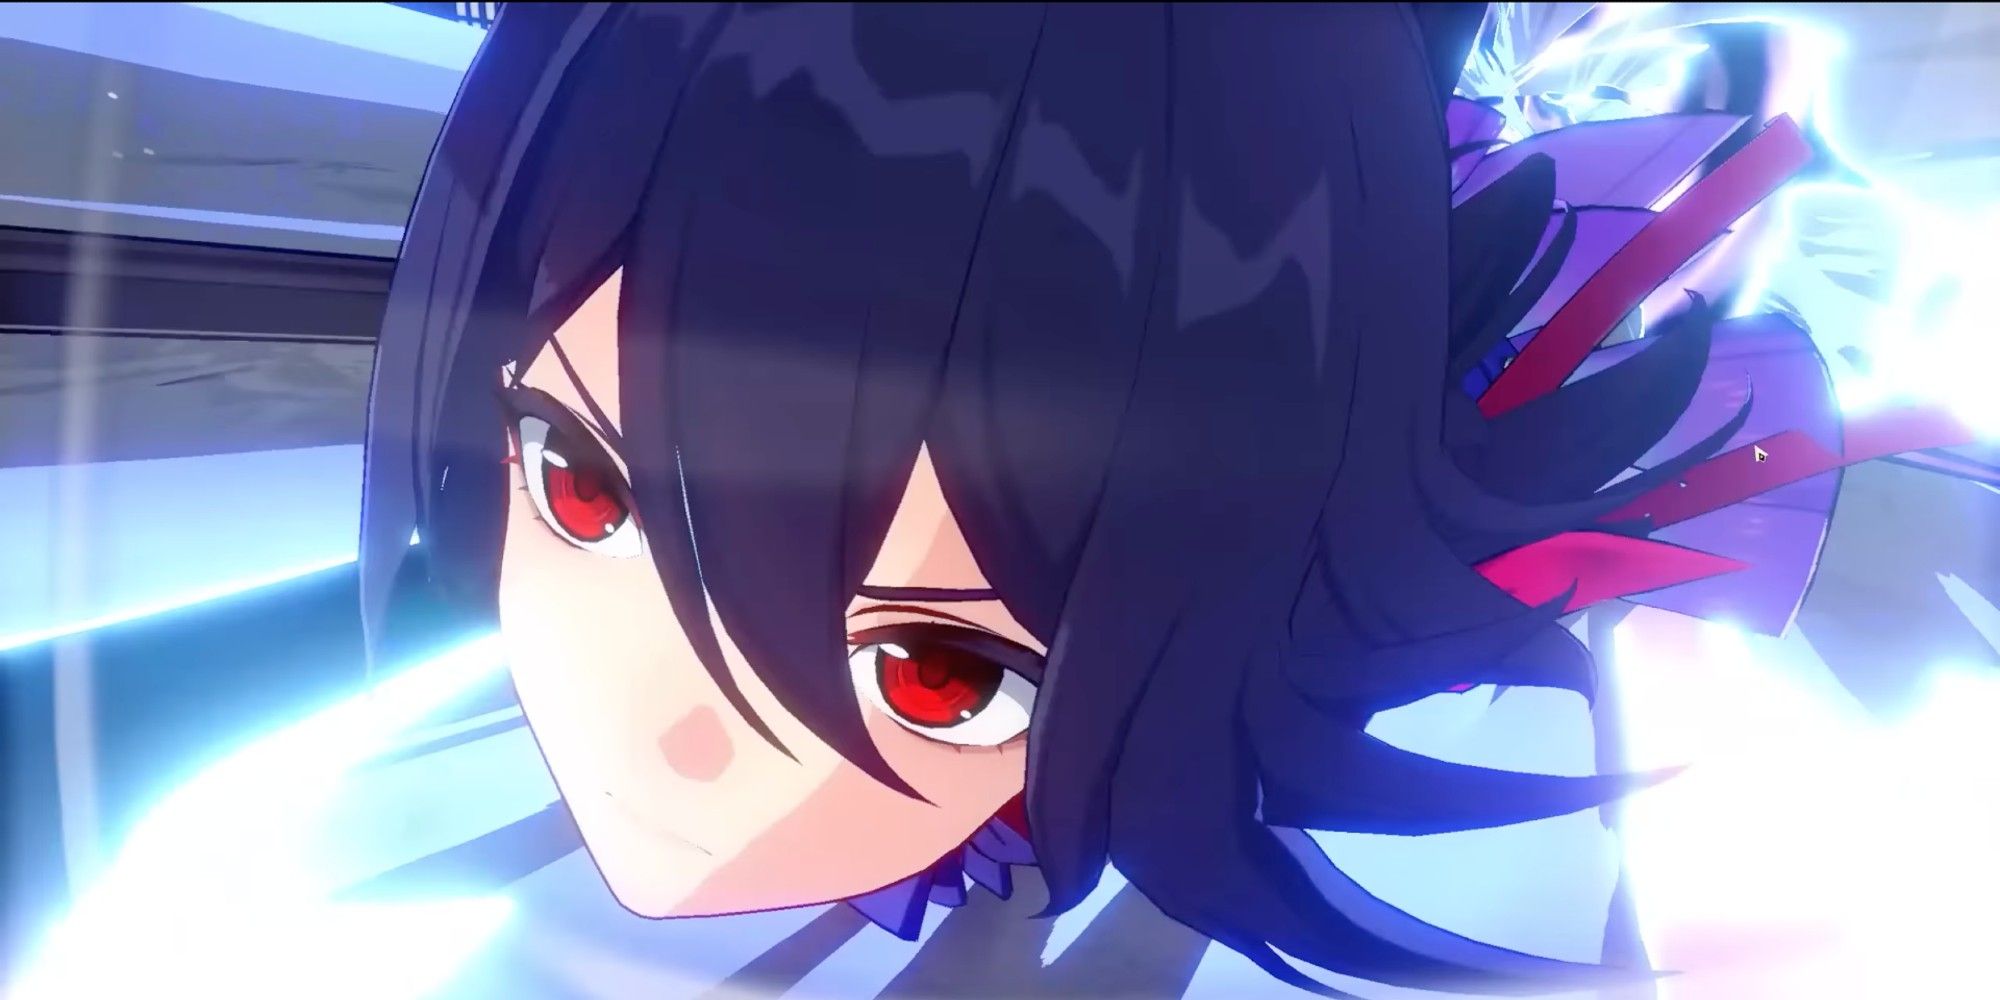 Seele zooms into motion toward the enemy in Honkai:Star Rail.